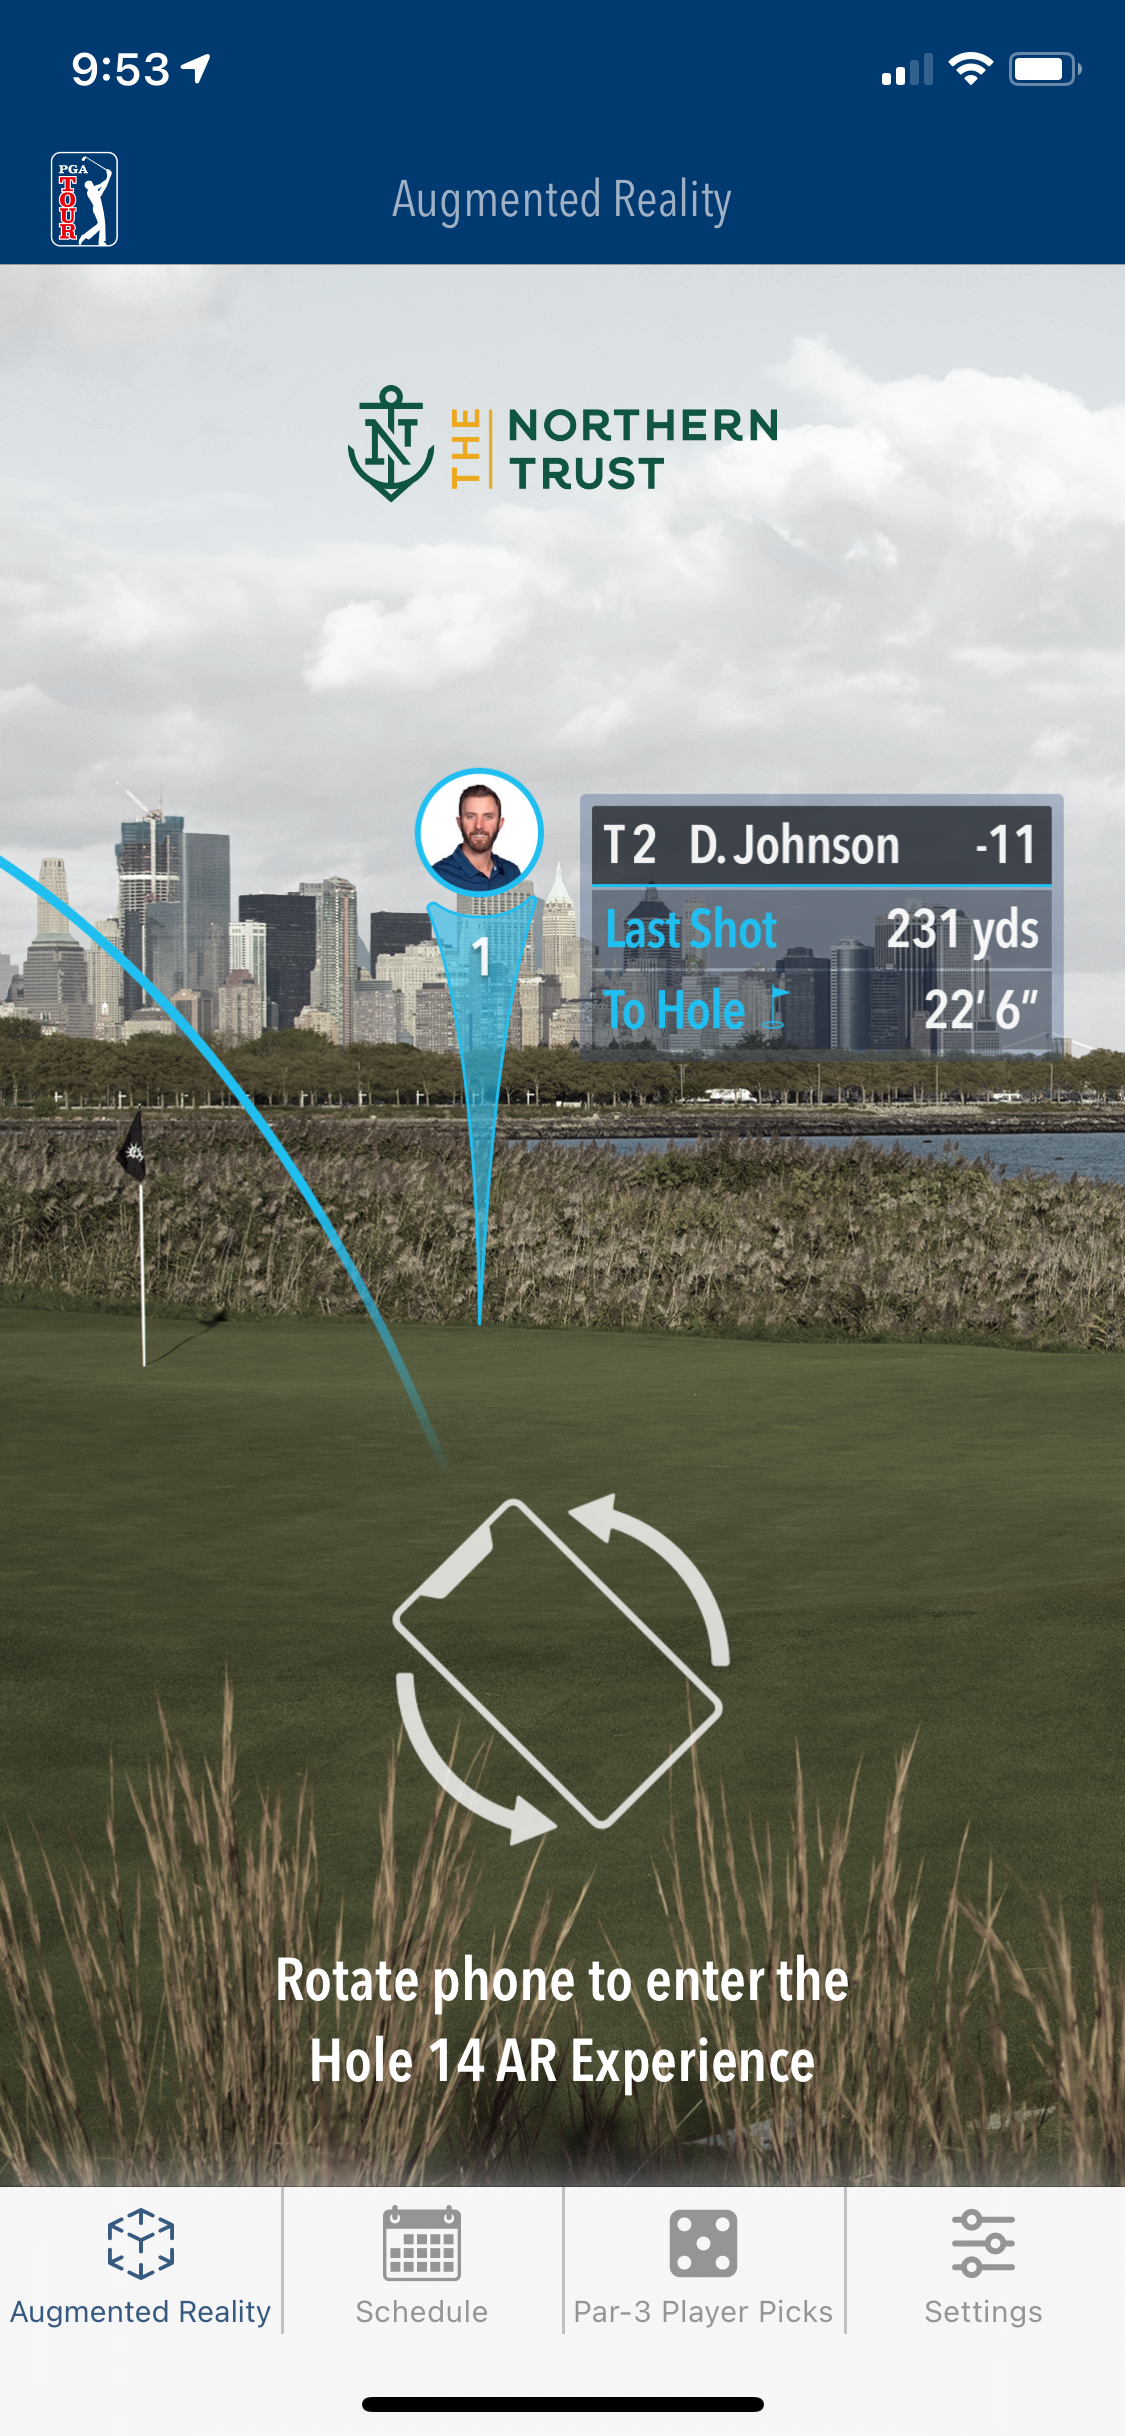 PGA Tour Creates Mobile AR Experience for In-Person Fans at 2021 FedExCup Playoffs